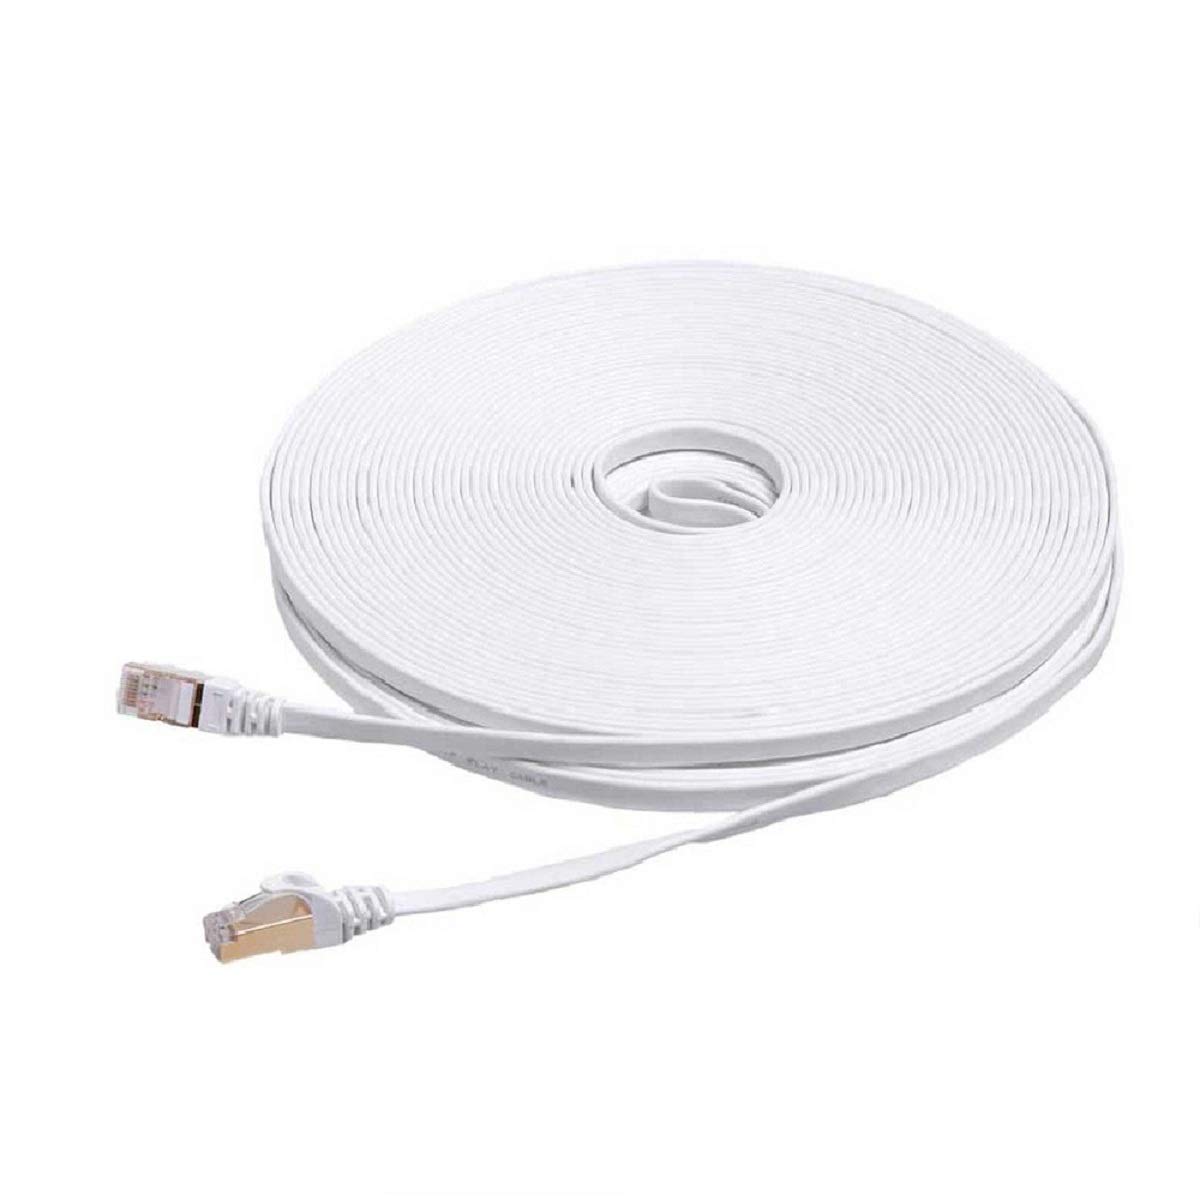 4. CableGeeker Cat 7 Ethernet cable